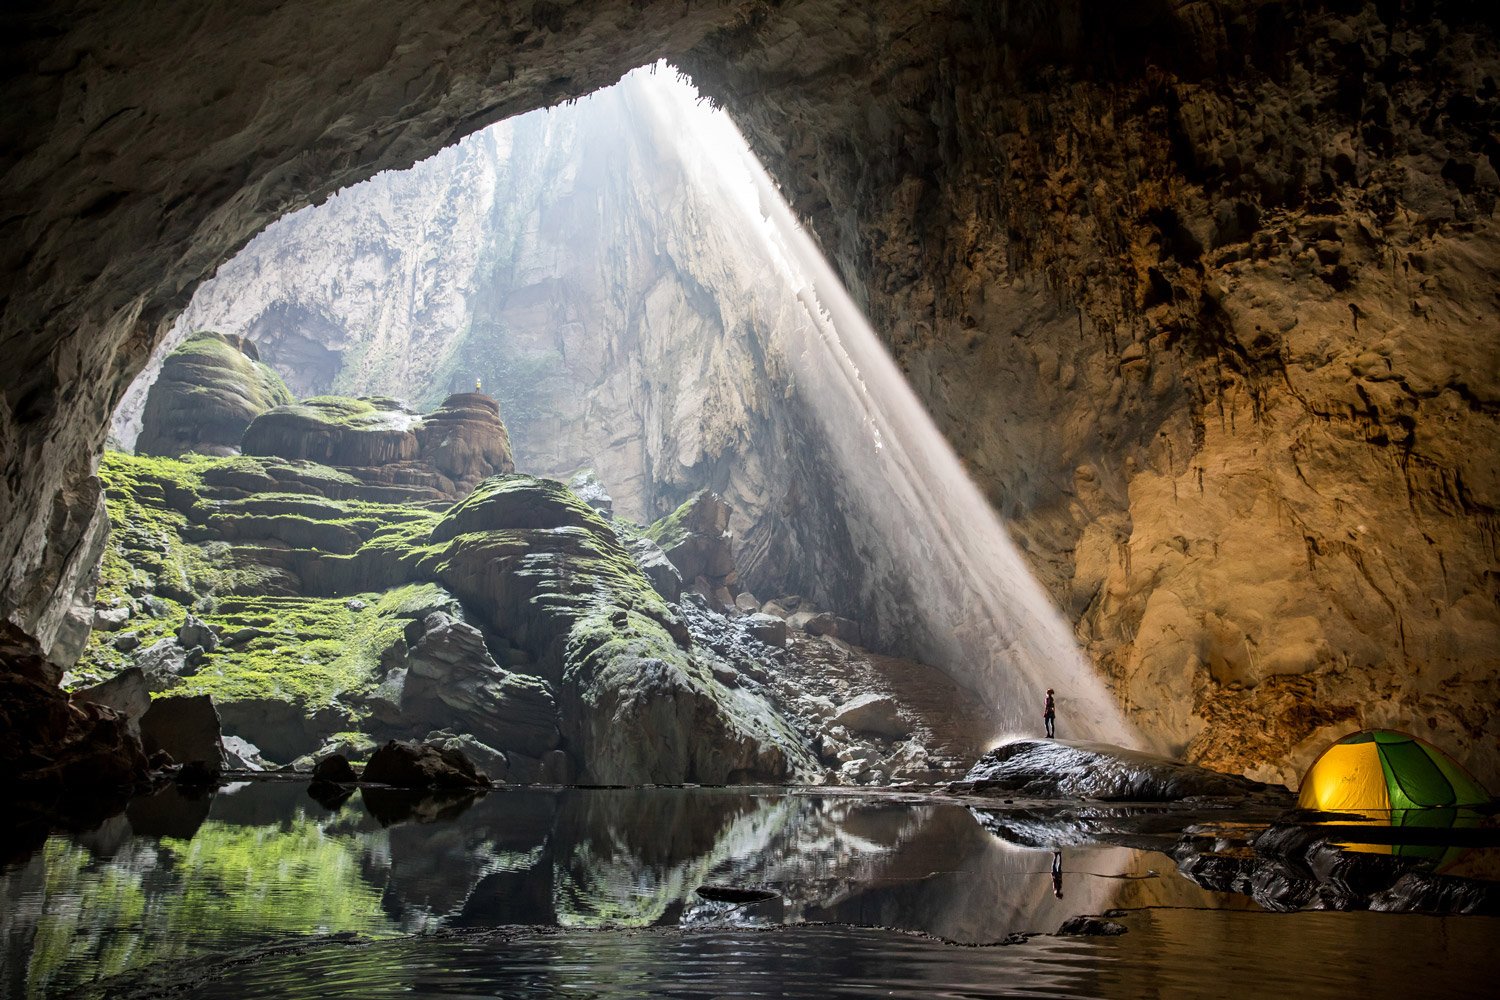 Son Doong cave not only known as the biggest cave in the world but also has typical geology value in the National Park